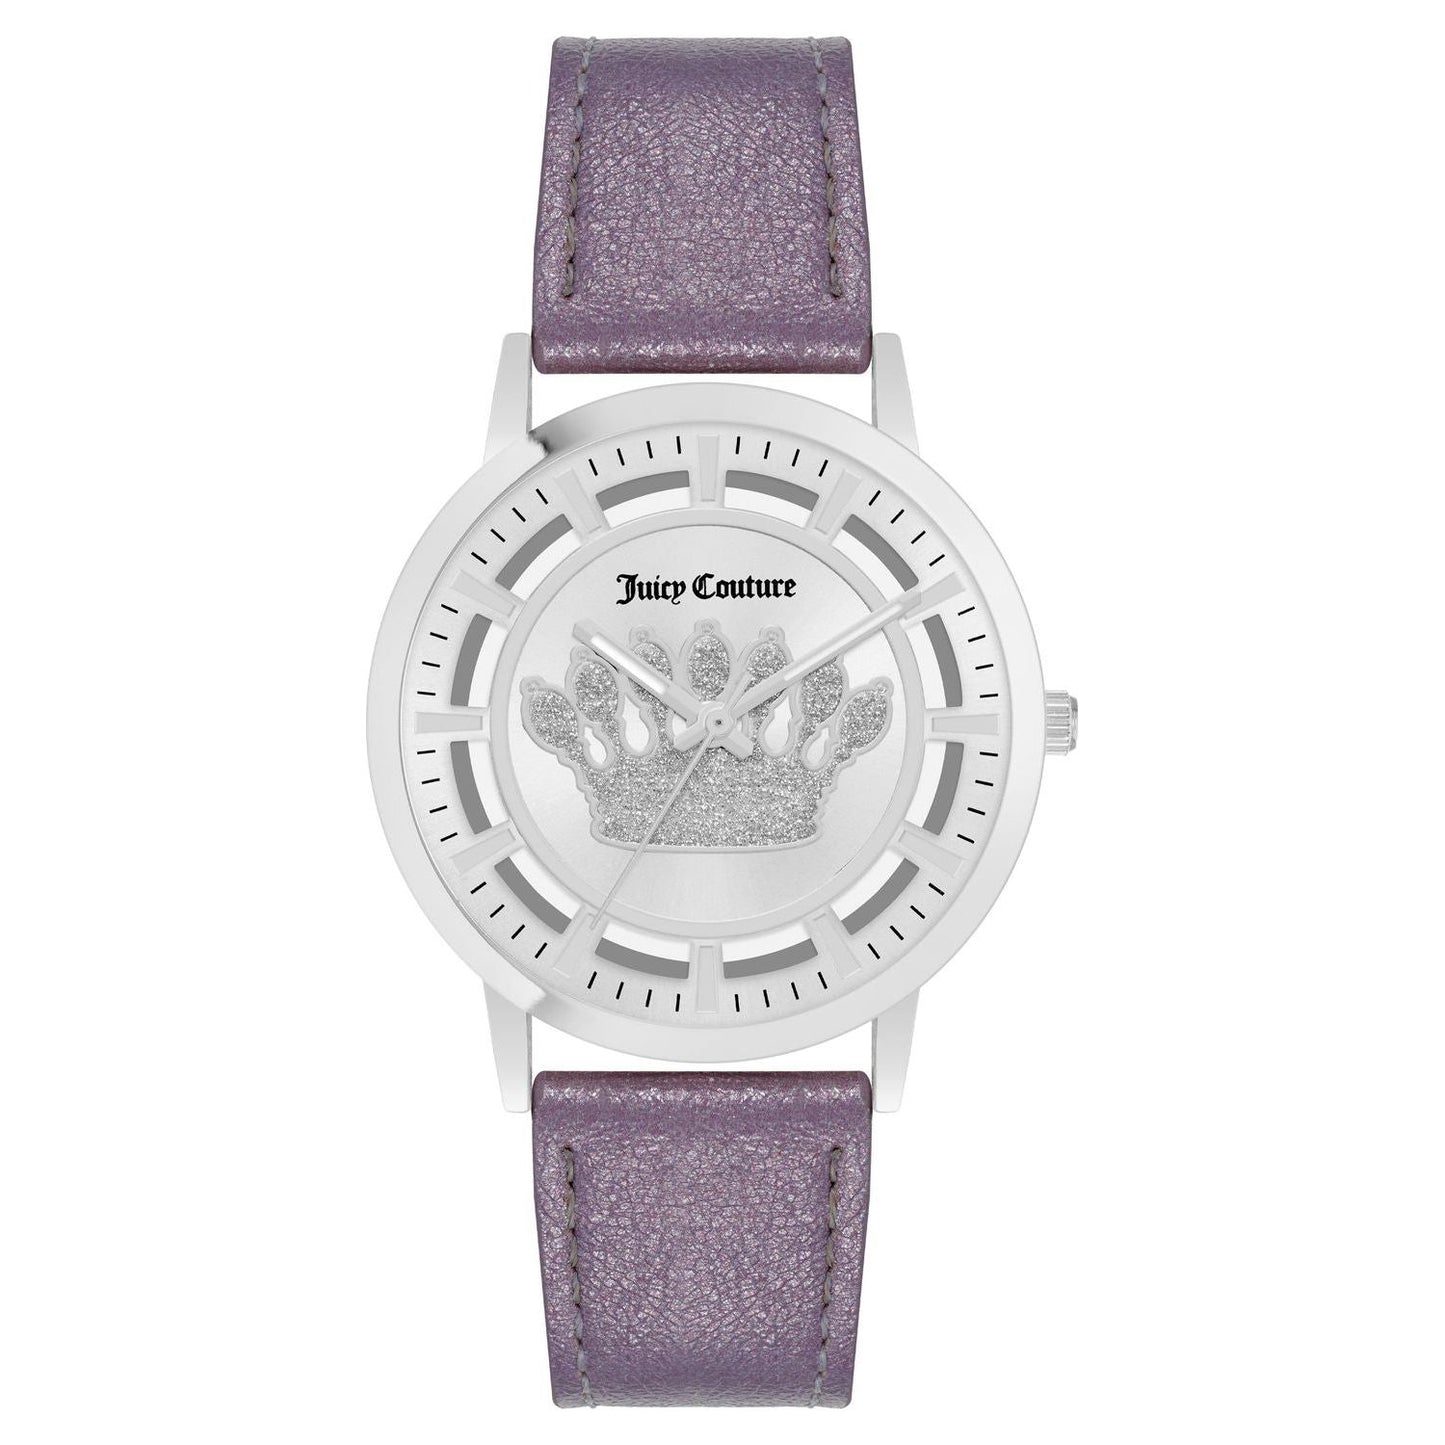 JUICY COUTURE JUICY COUTURE MOD. JC_1345SVLV WATCHES juicy-couture-mod-jc_1345svlv